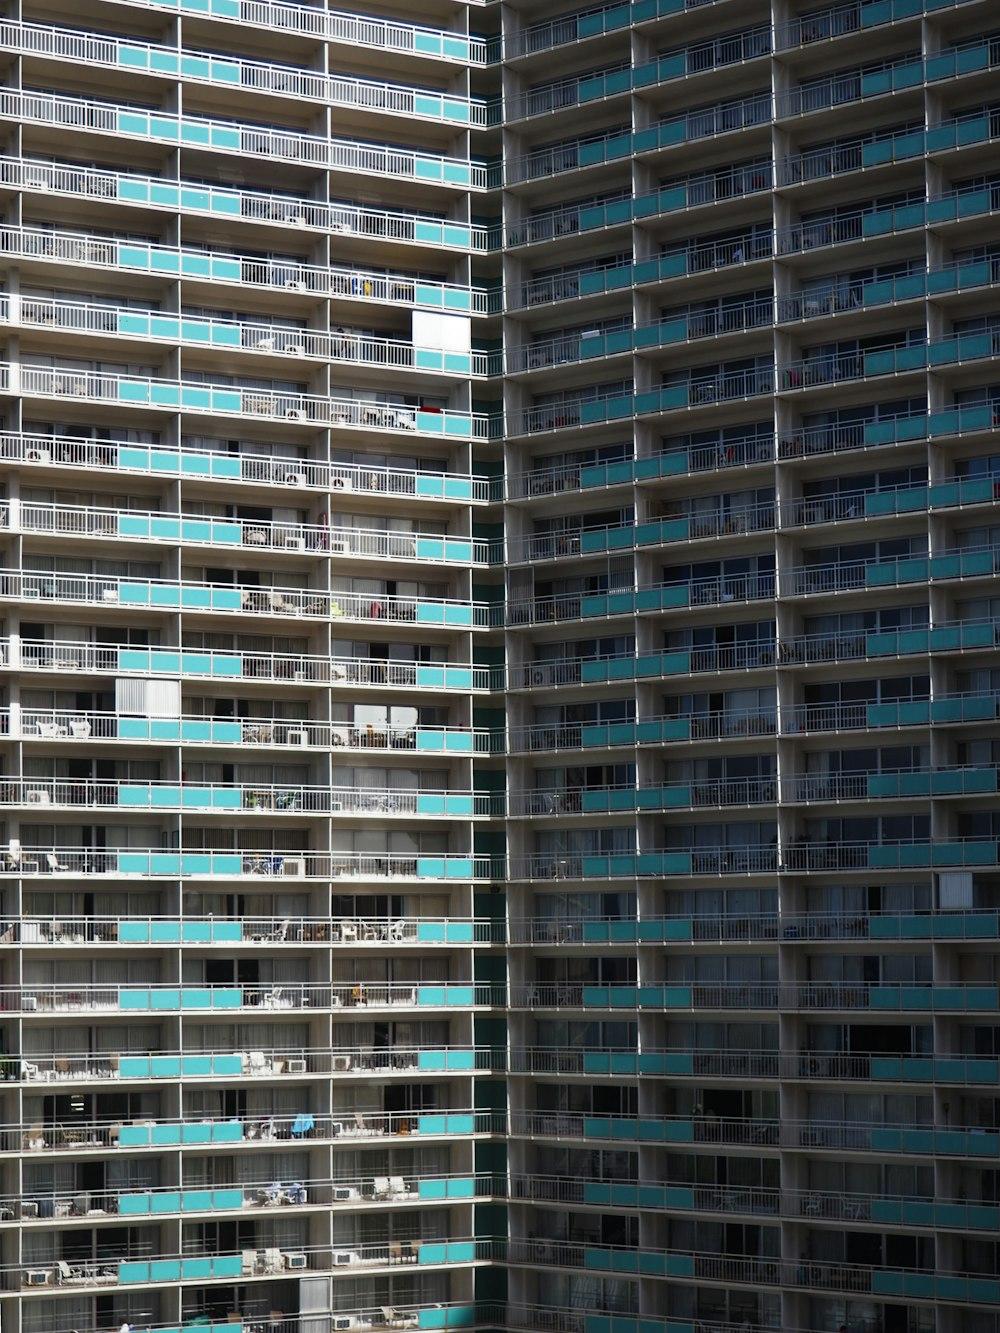 image of a large building in waikiki